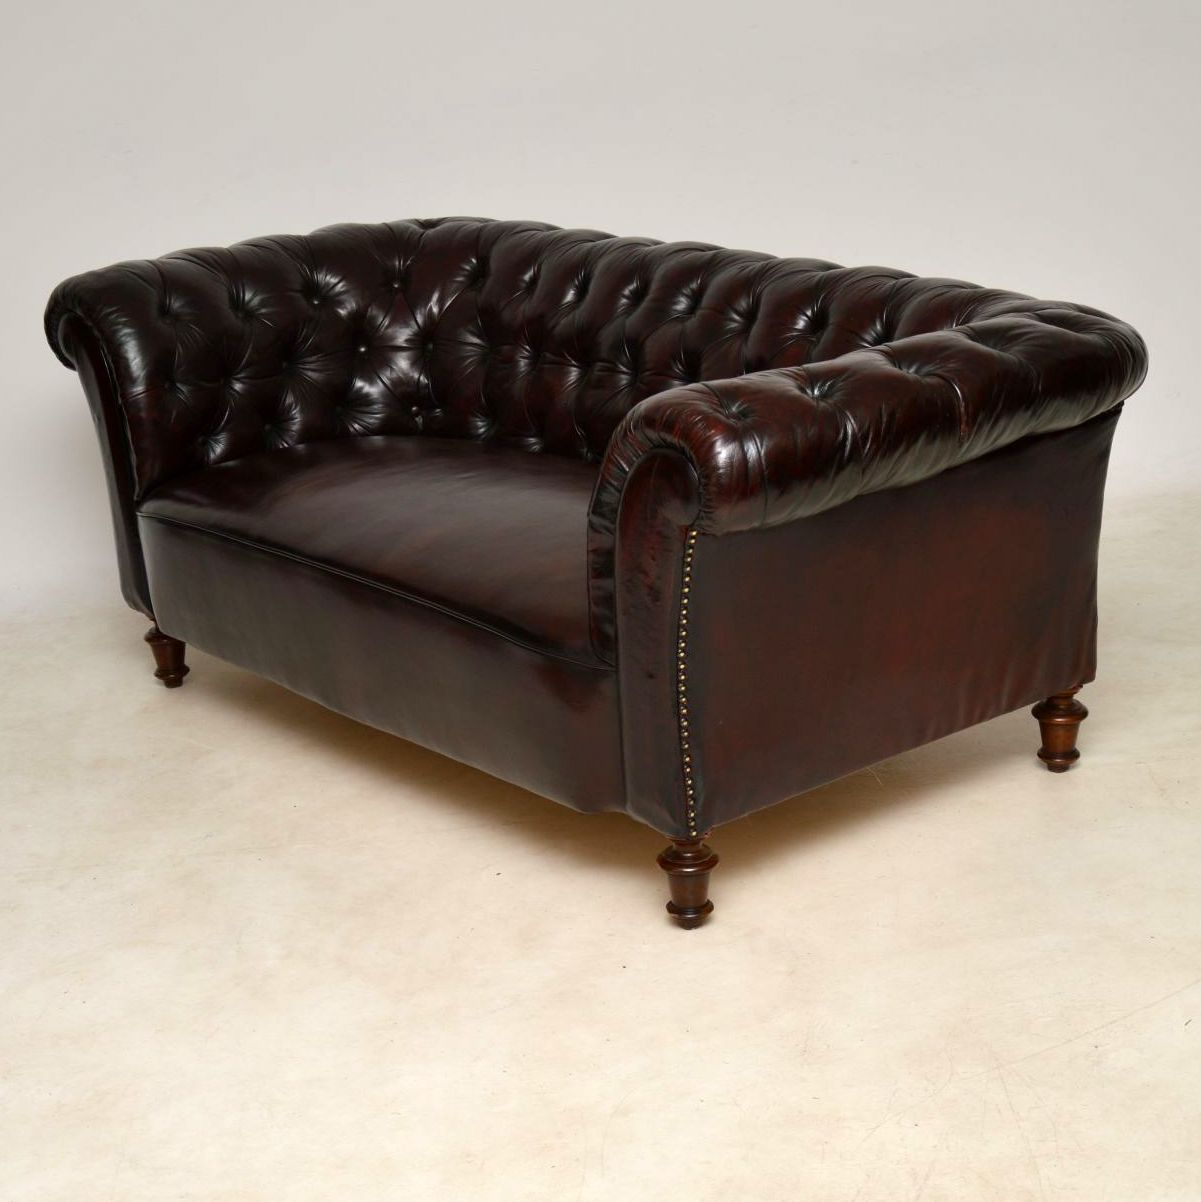 Antique Swedish Leather Chesterfield Sofa | Interior For Leather Chesterfield Sofas (View 14 of 15)